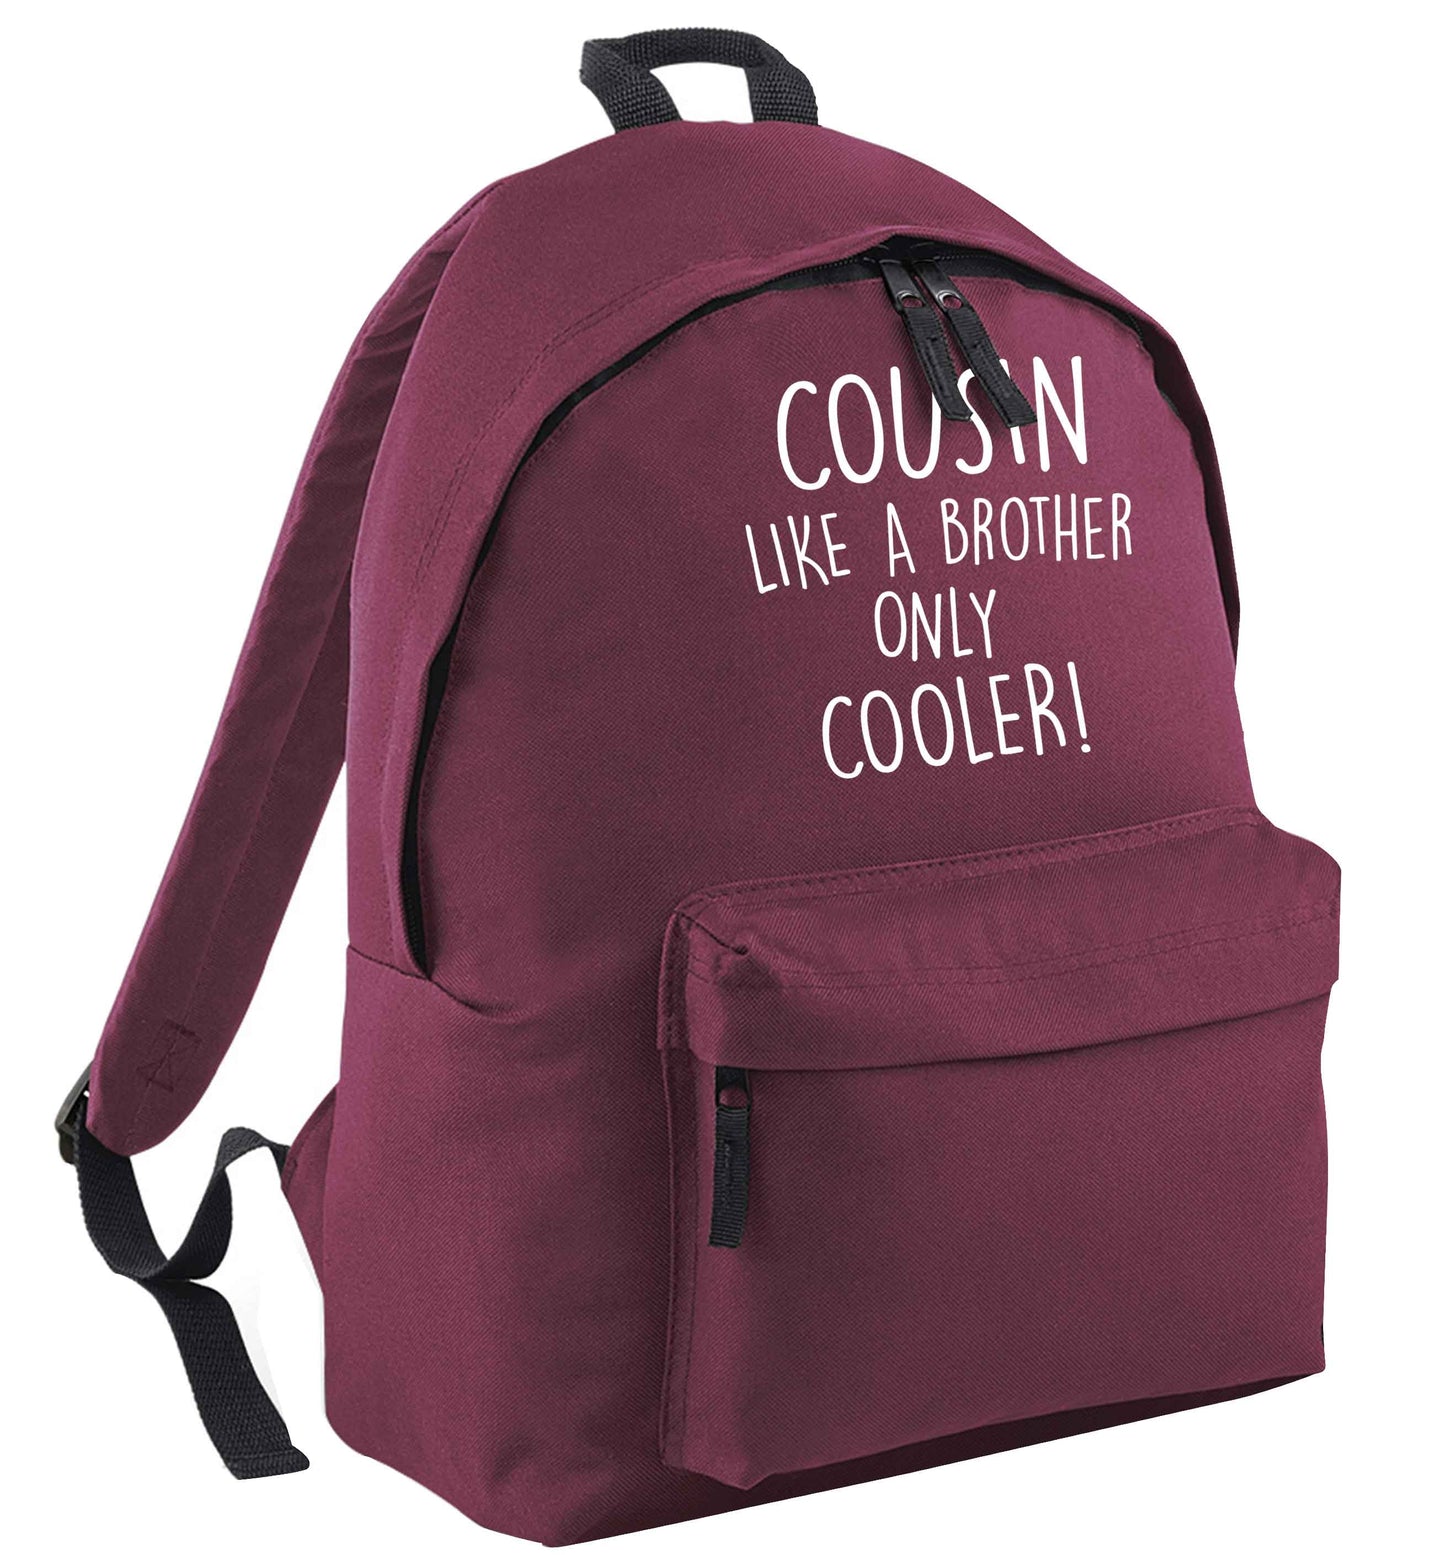 Cousin like a brother only cooler maroon adults backpack